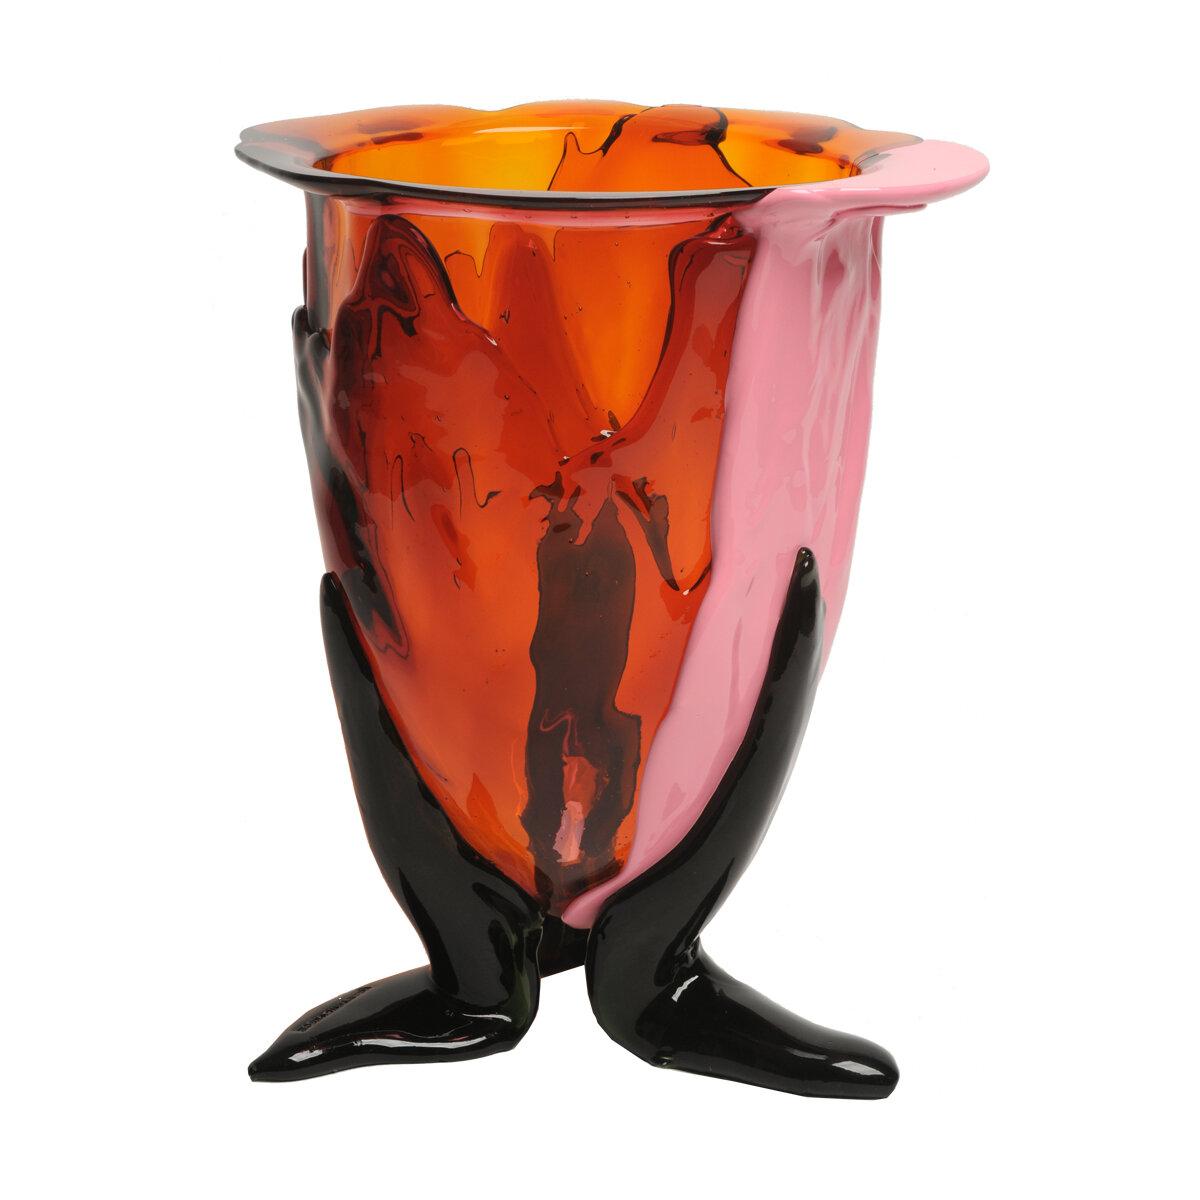 Amazonia vase - clear orange, clear fuchsia, clear bottle green, matt pink.

Vase in soft resin designed by Gaetano Pesce in 1995 for Fish Design collection.

Measures: L Ø 22cm x H 36cm

Other sizes available.
Colours: clear orange, clear fuchsia,